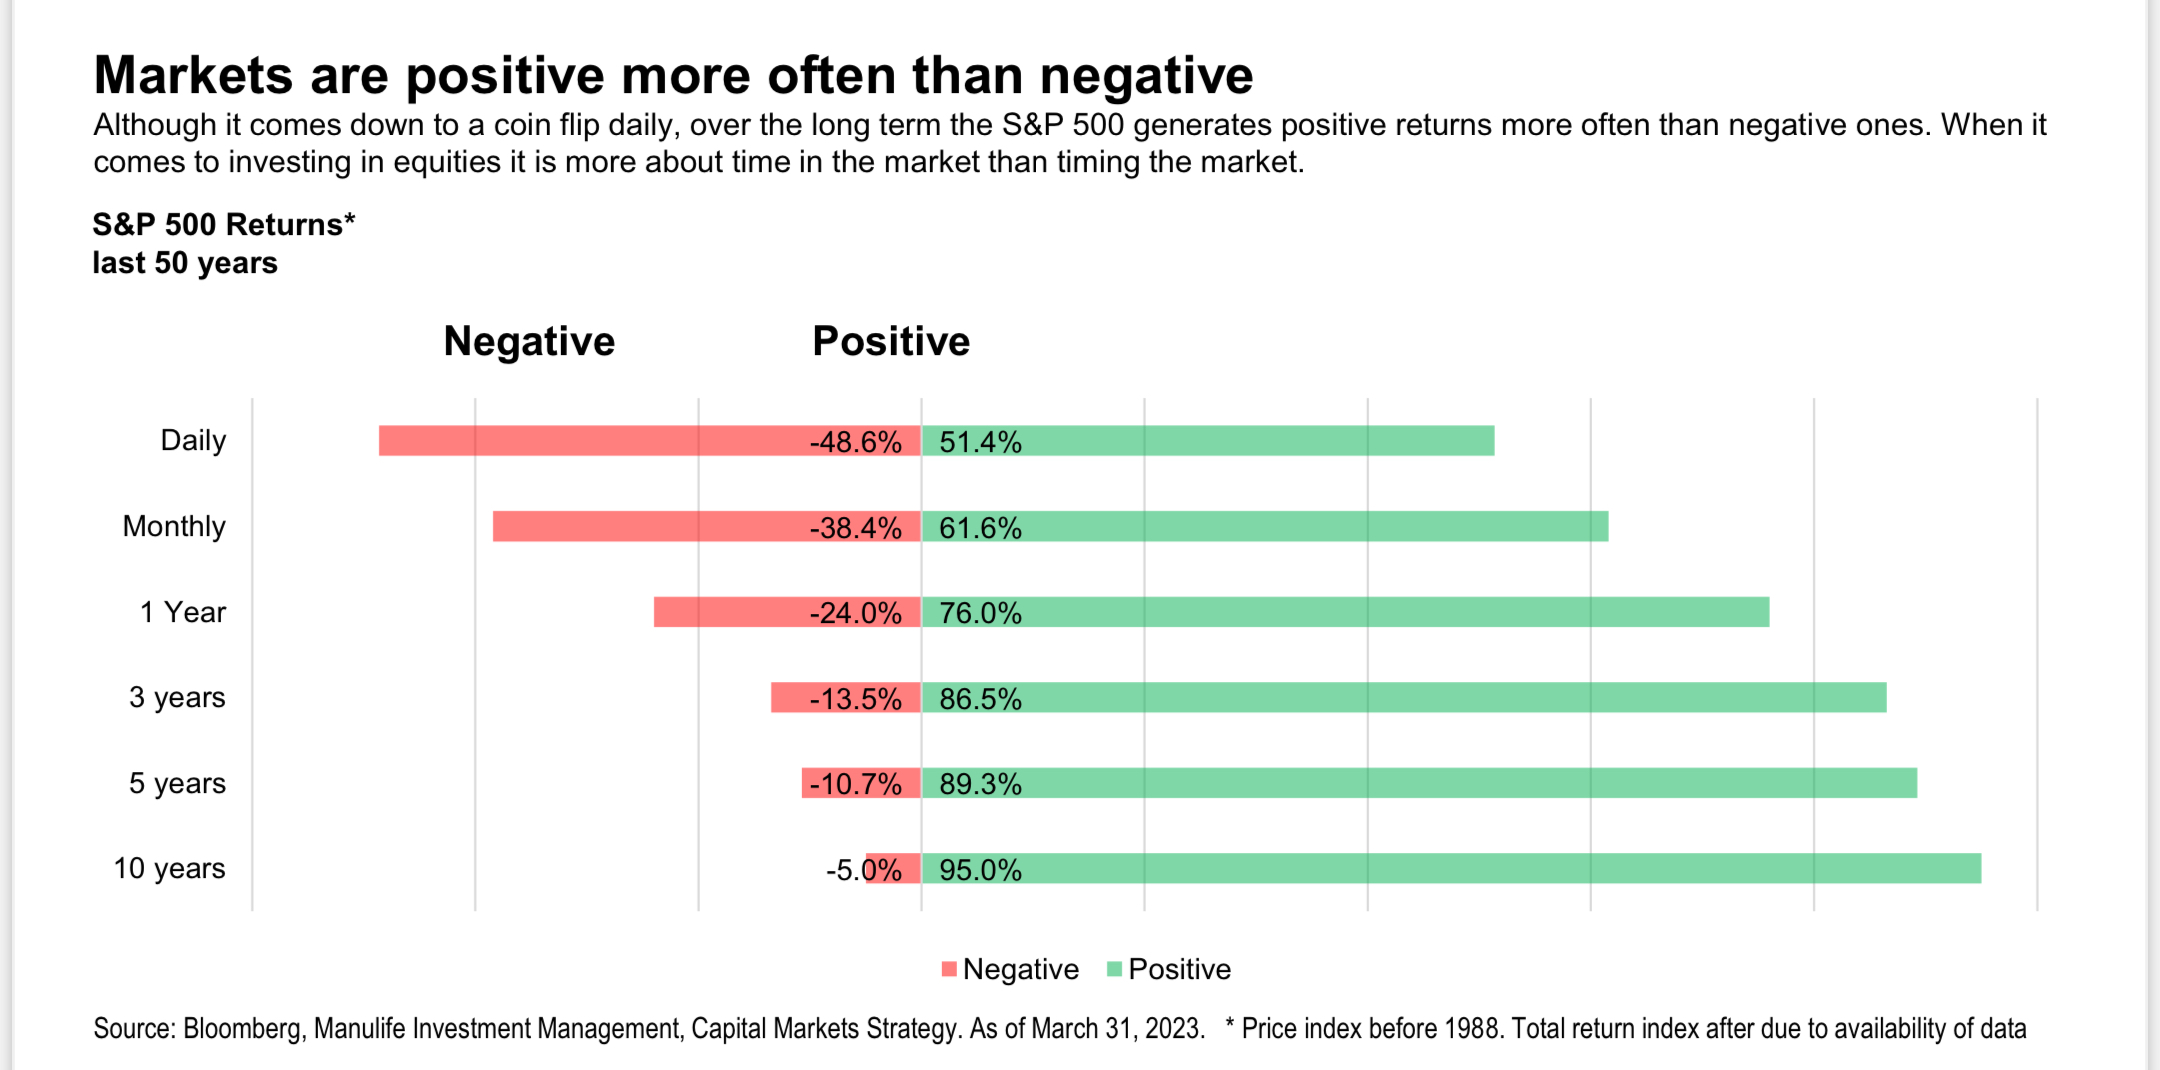 Markets are positive more than negative